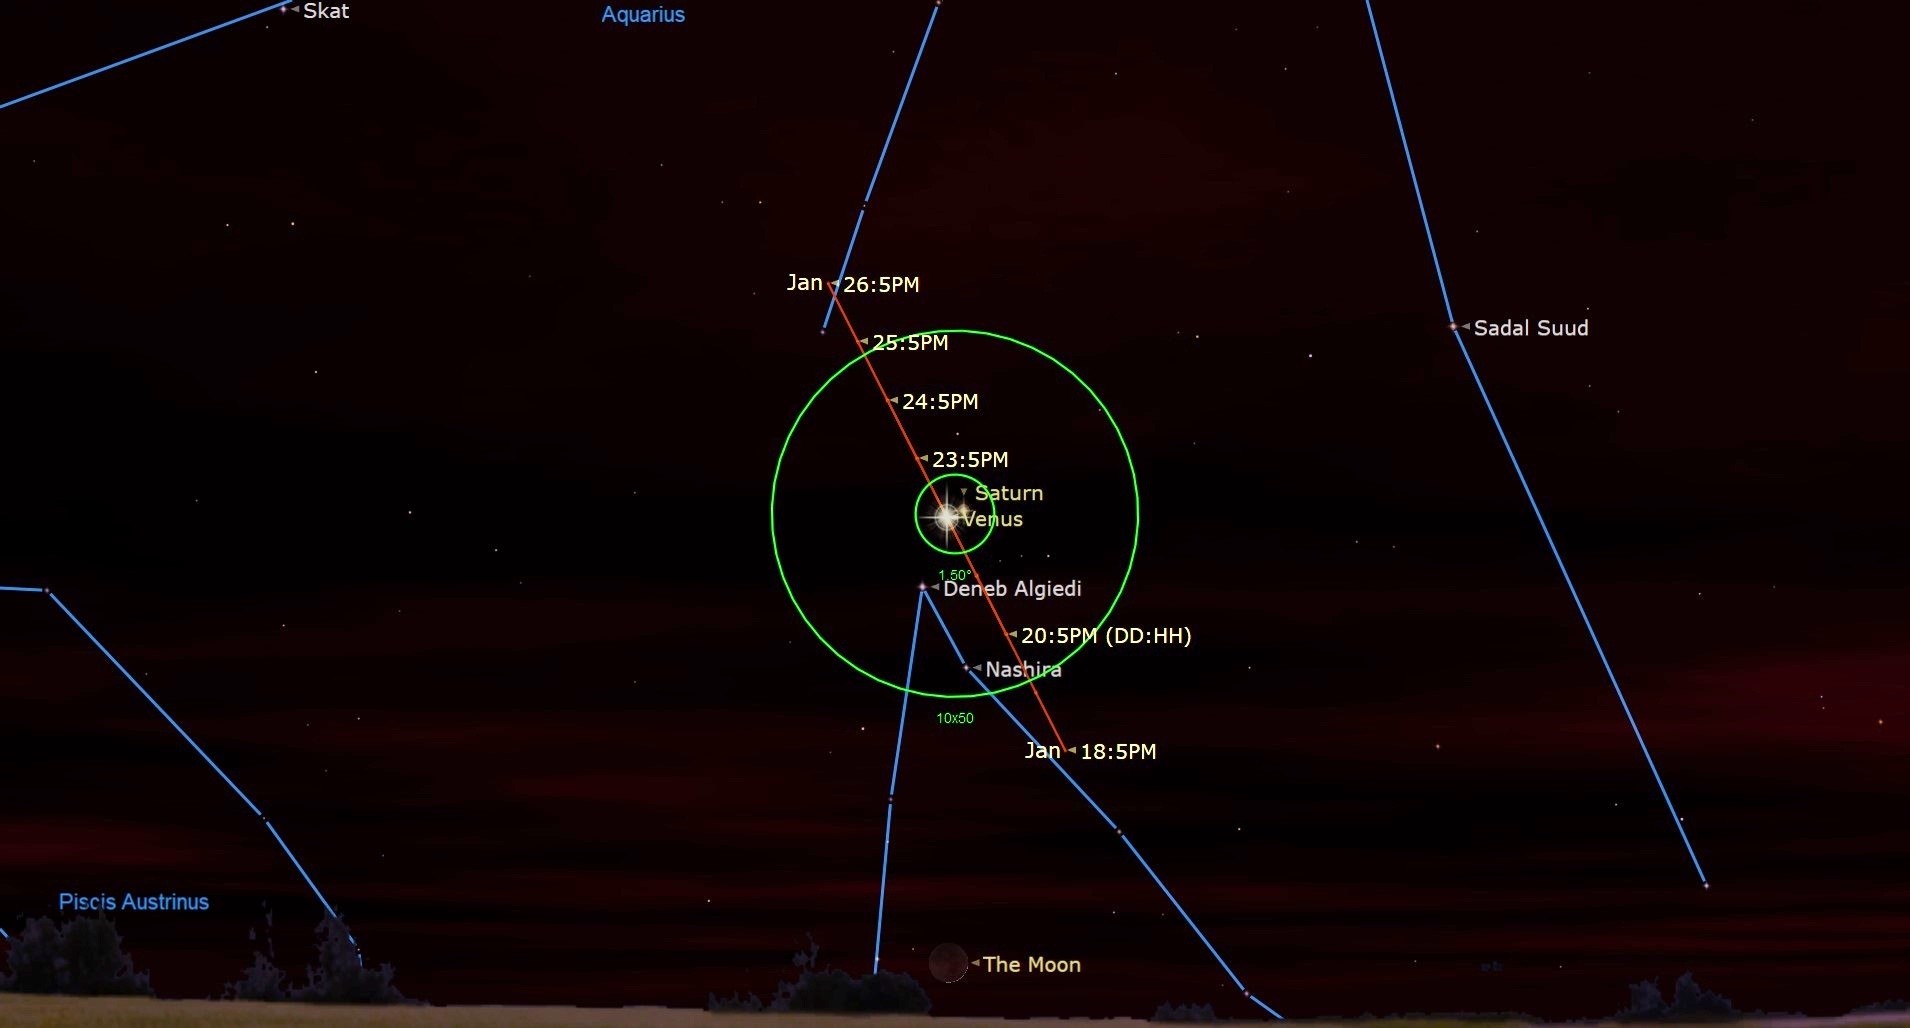 An illustration of the January 22 night sky showing the conjunction of Venus and Saturn.